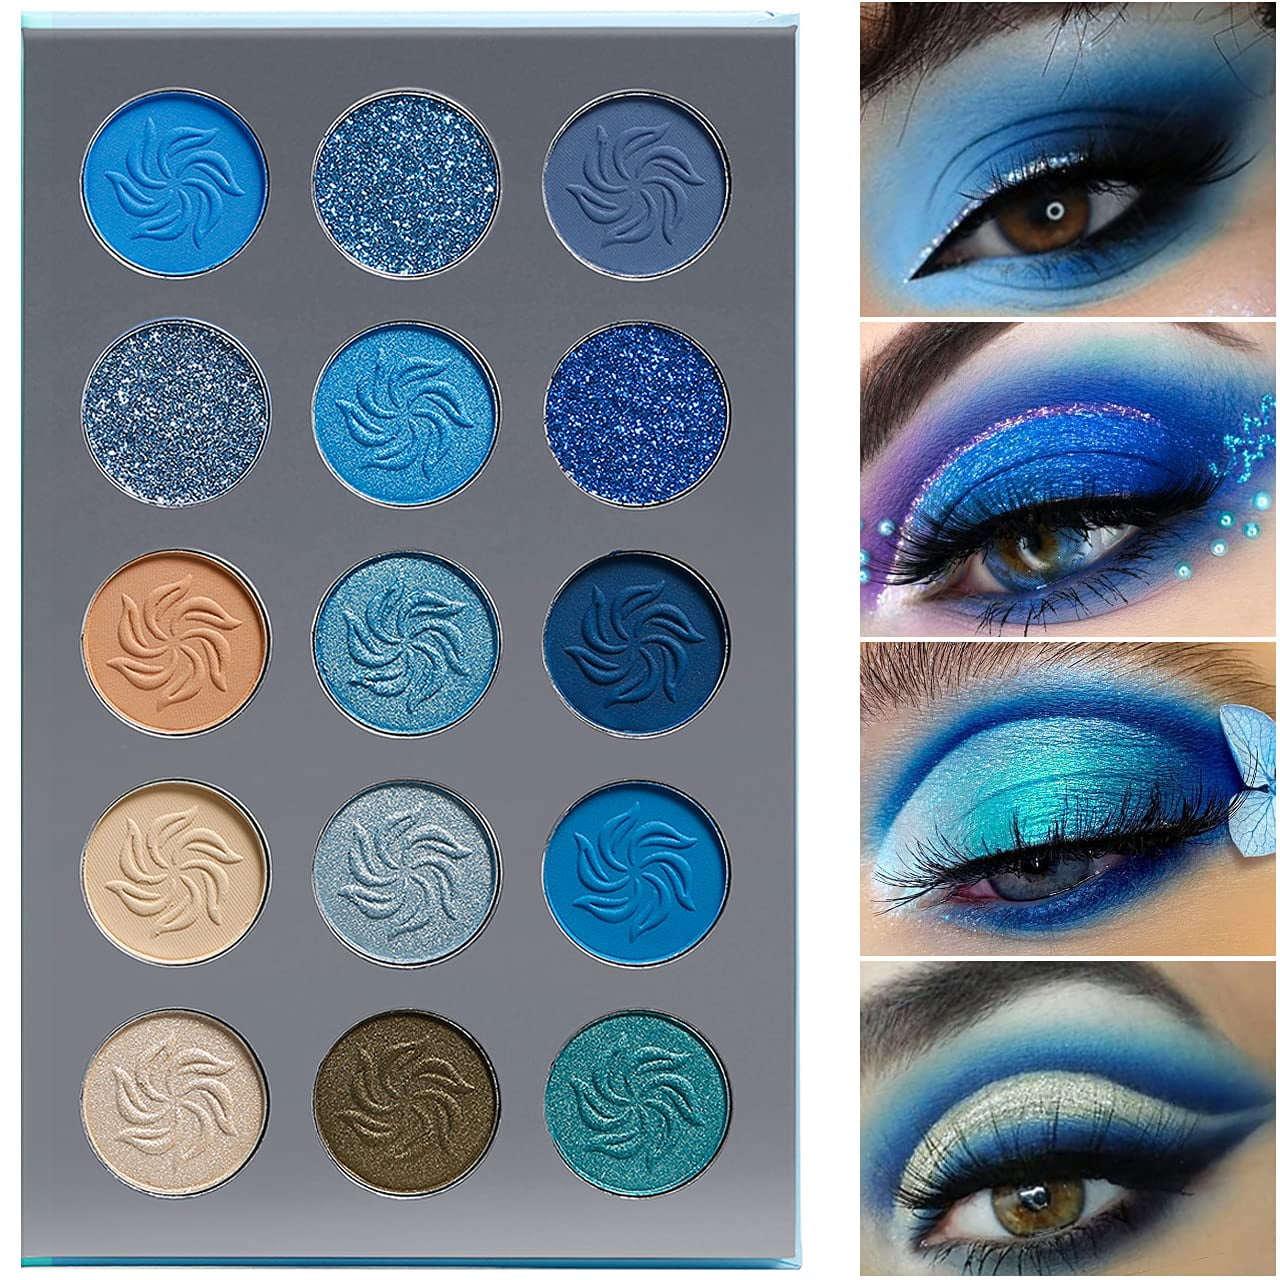 10 Stunning Blue Eyeshadow Looks for Green Eyes - Get Ready to Turn Heads!